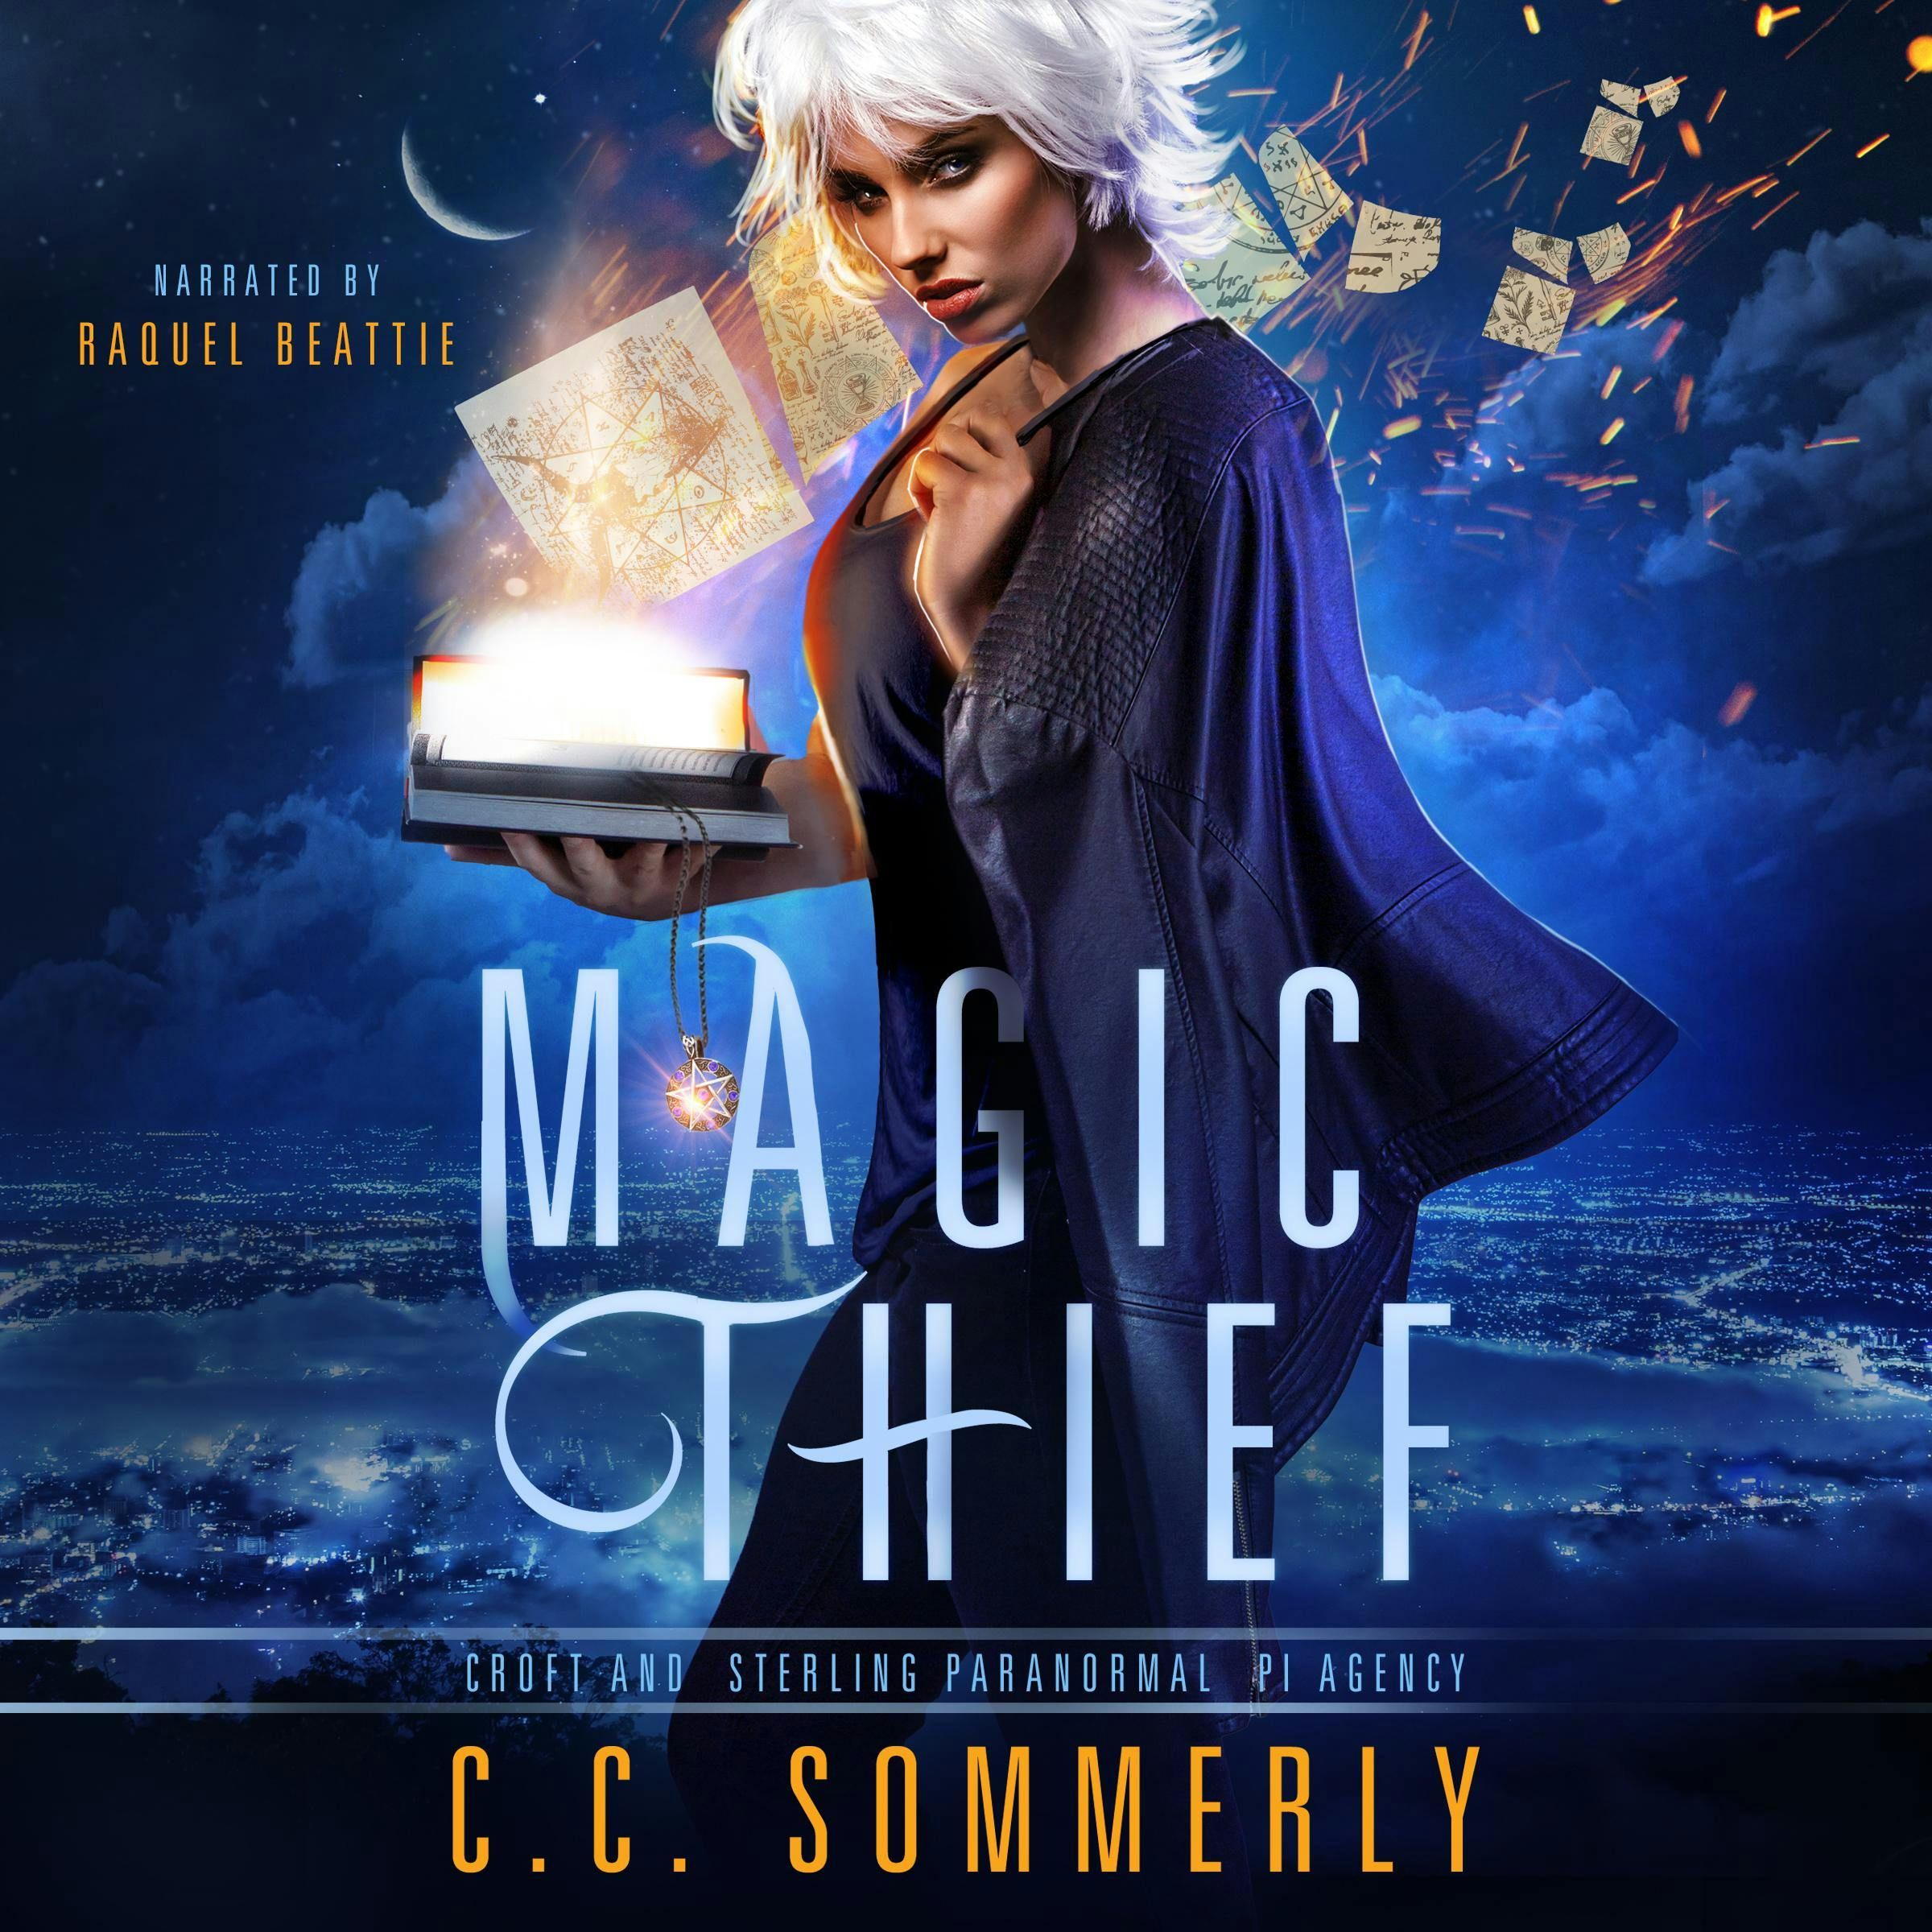 Magic Thief: Croft and Sterling Paranormal PI Agency - C.C. Sommerly